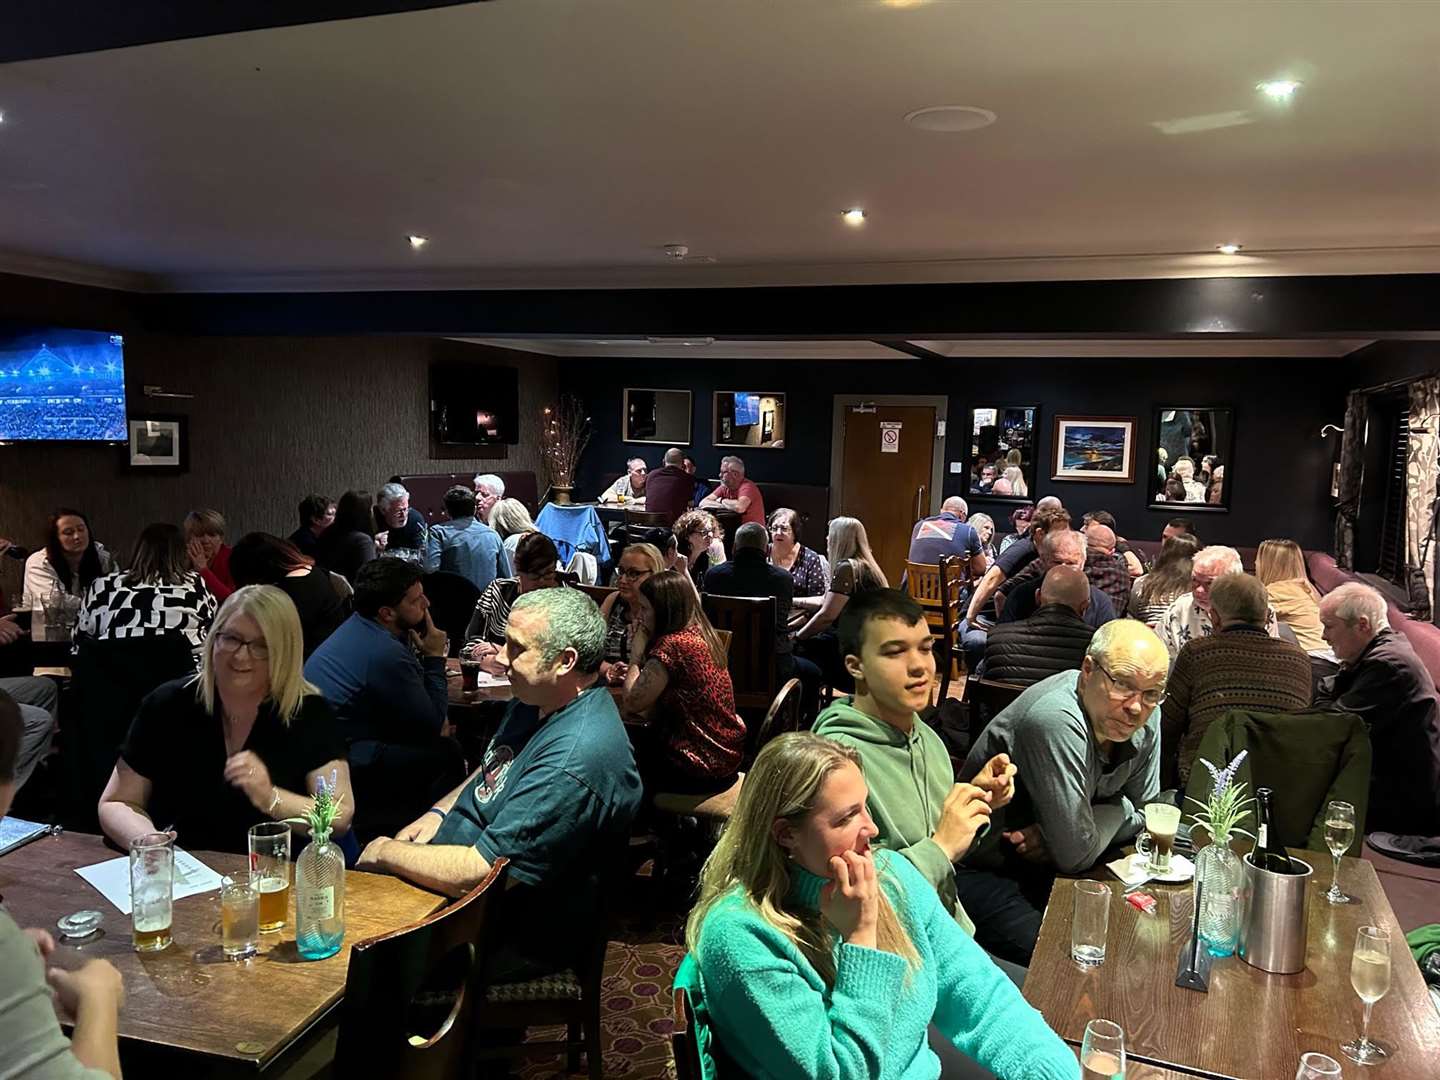 A great turnout for the fundraising quiz in memory of Malcolm Morrison.